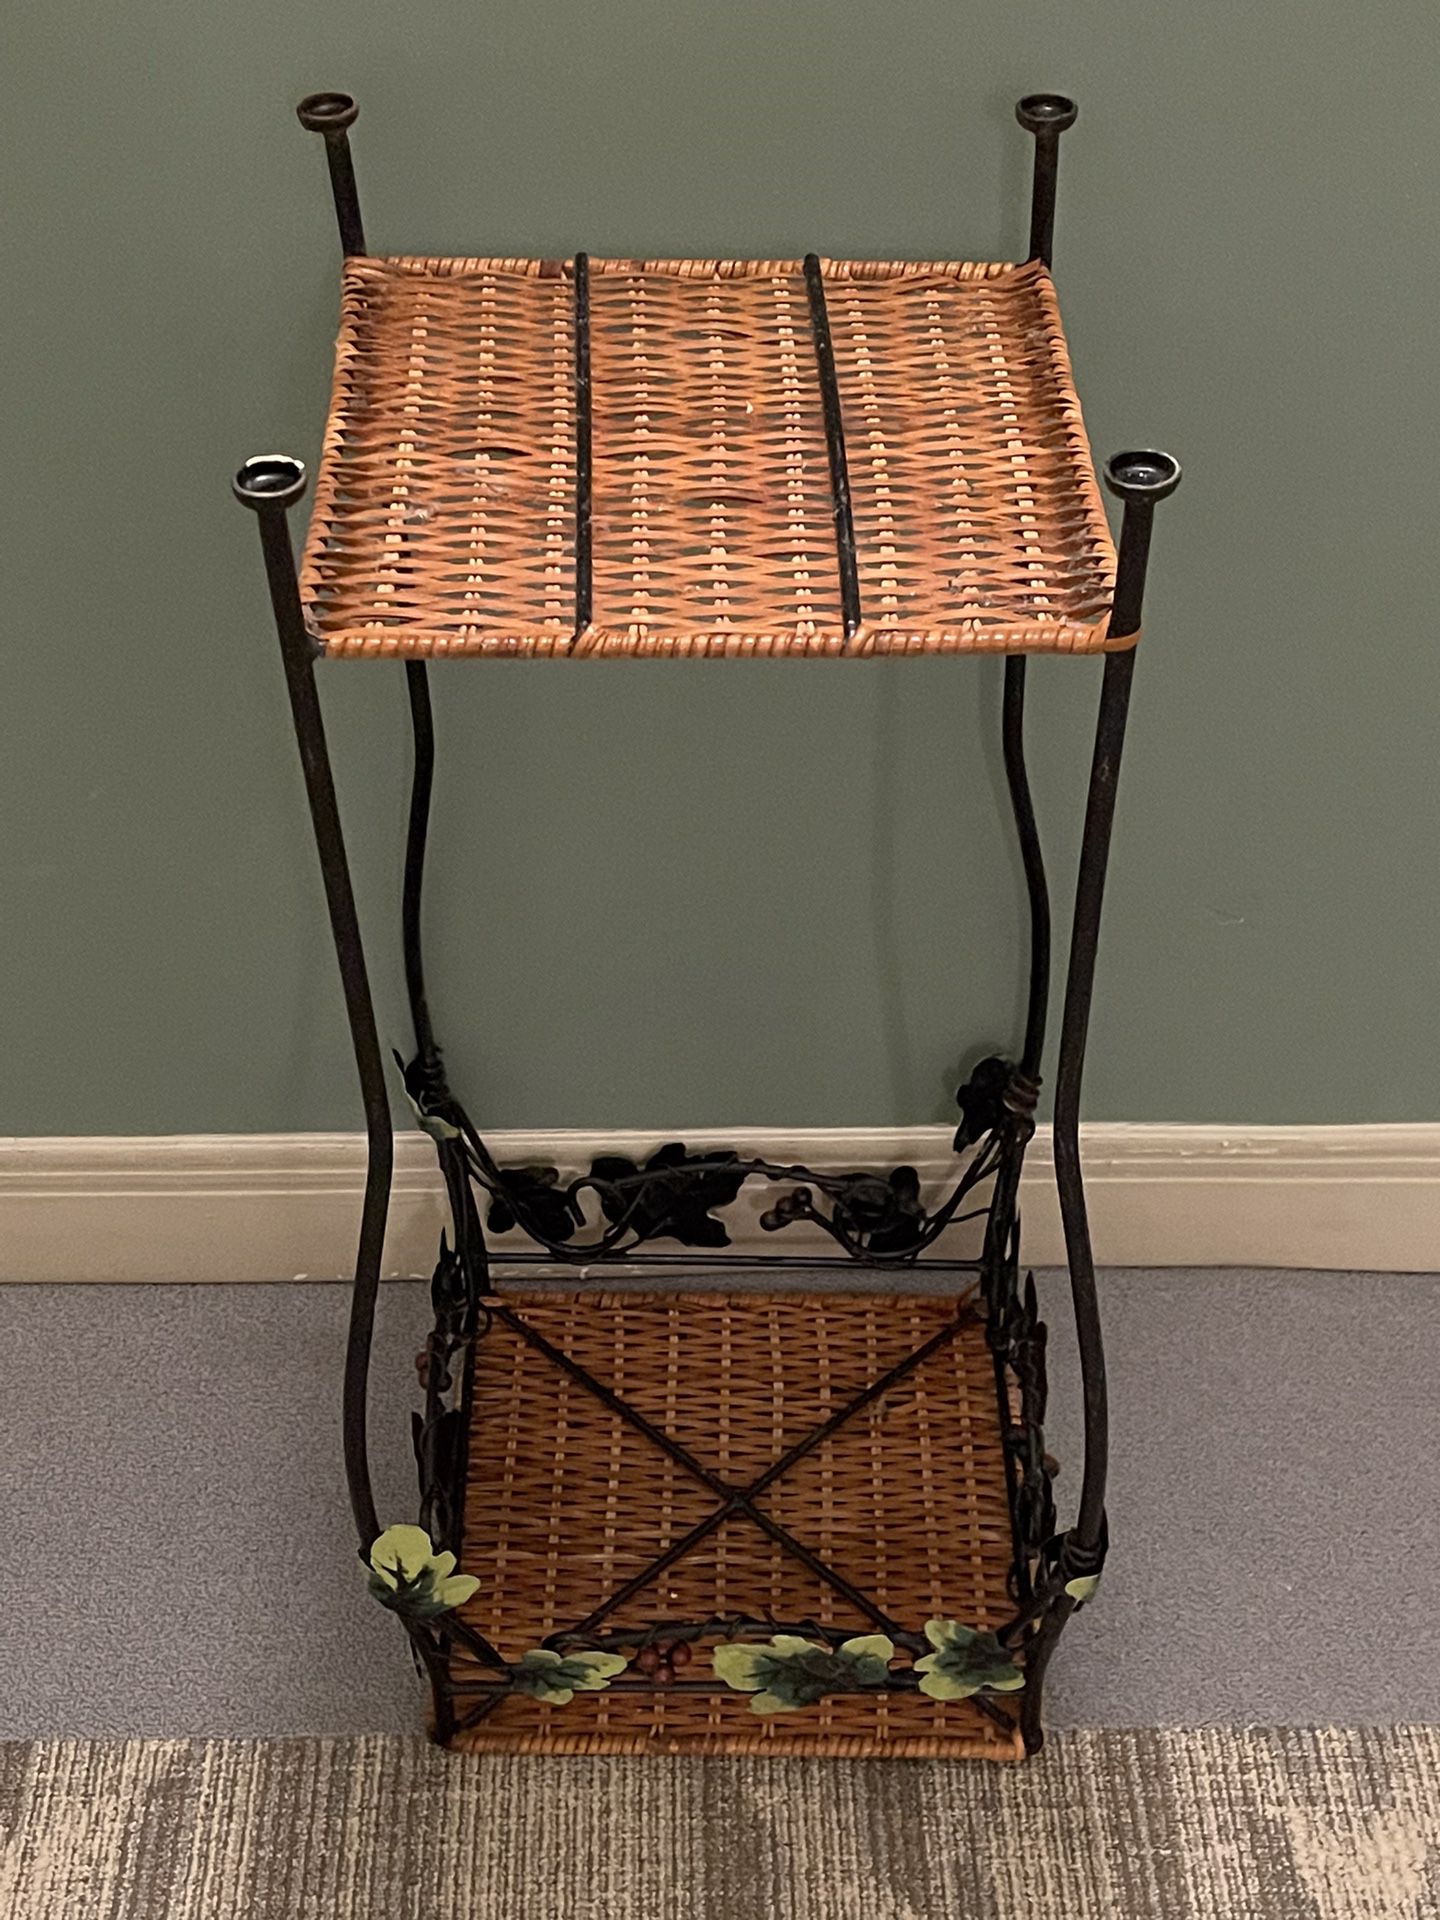 WROUGHT IRON PLANT STAND - firm price